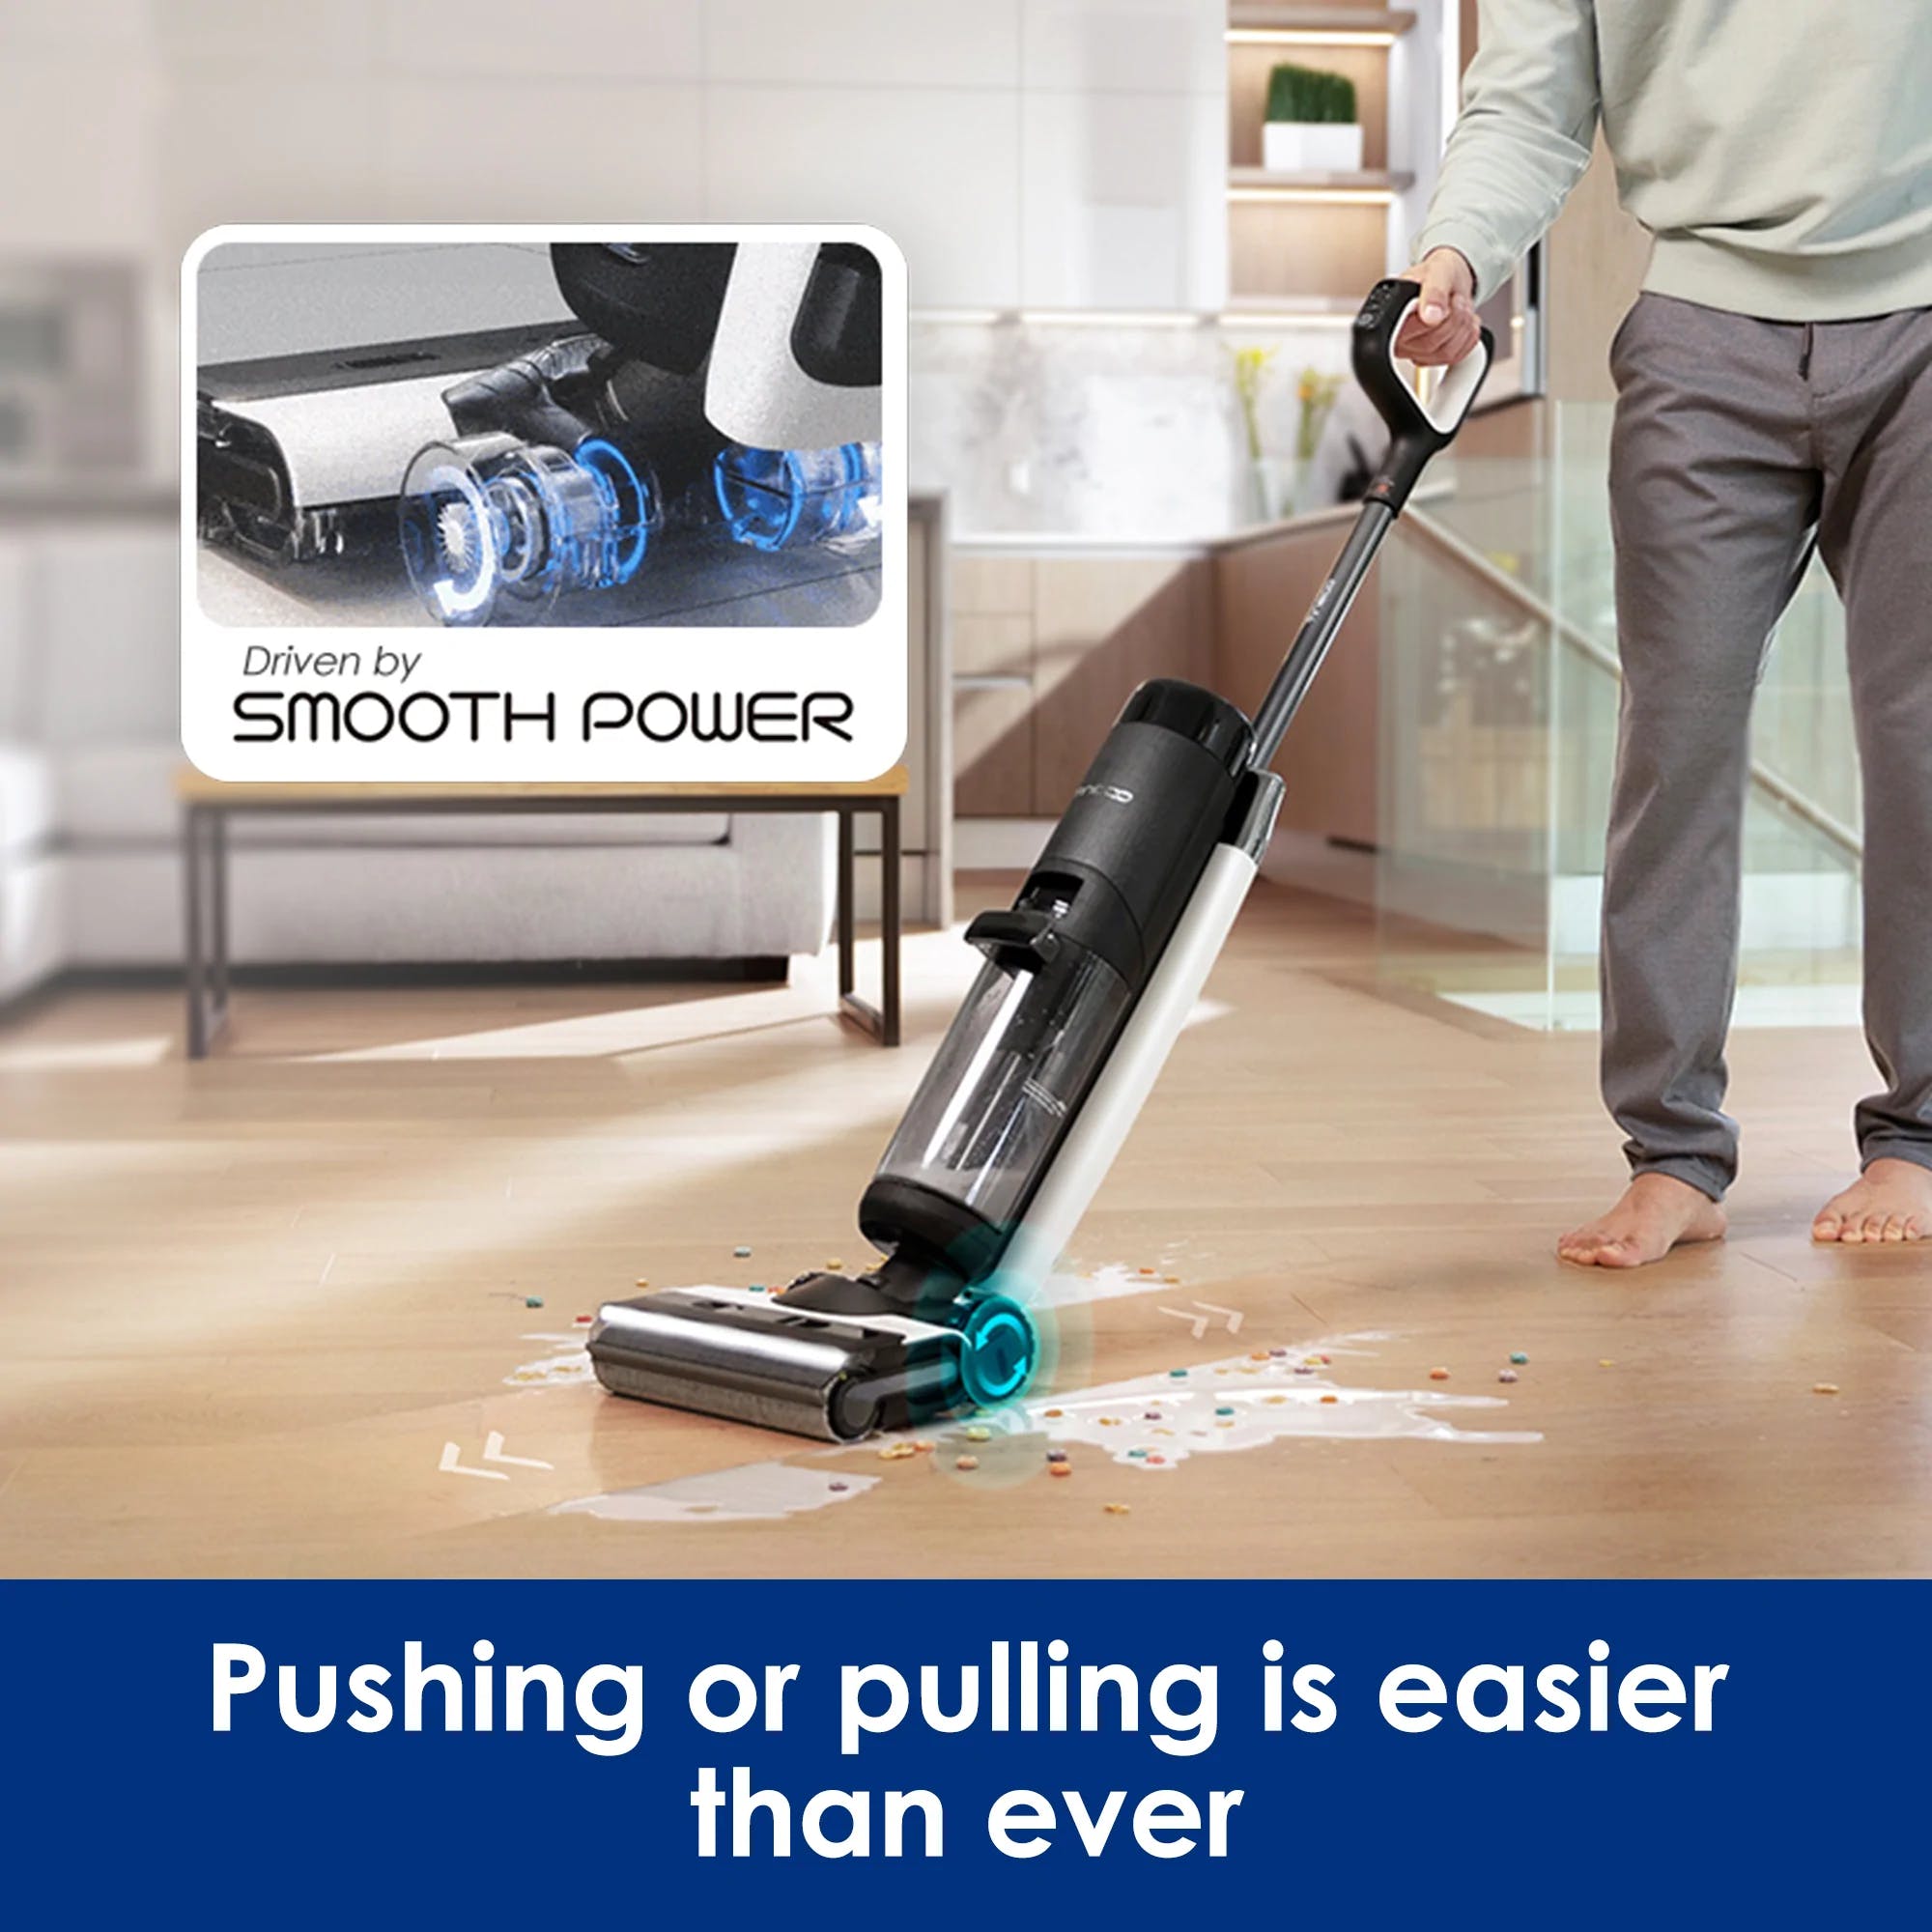 Award-winning Tineco Floor One S7 Pro wet-dry vac cleans itself